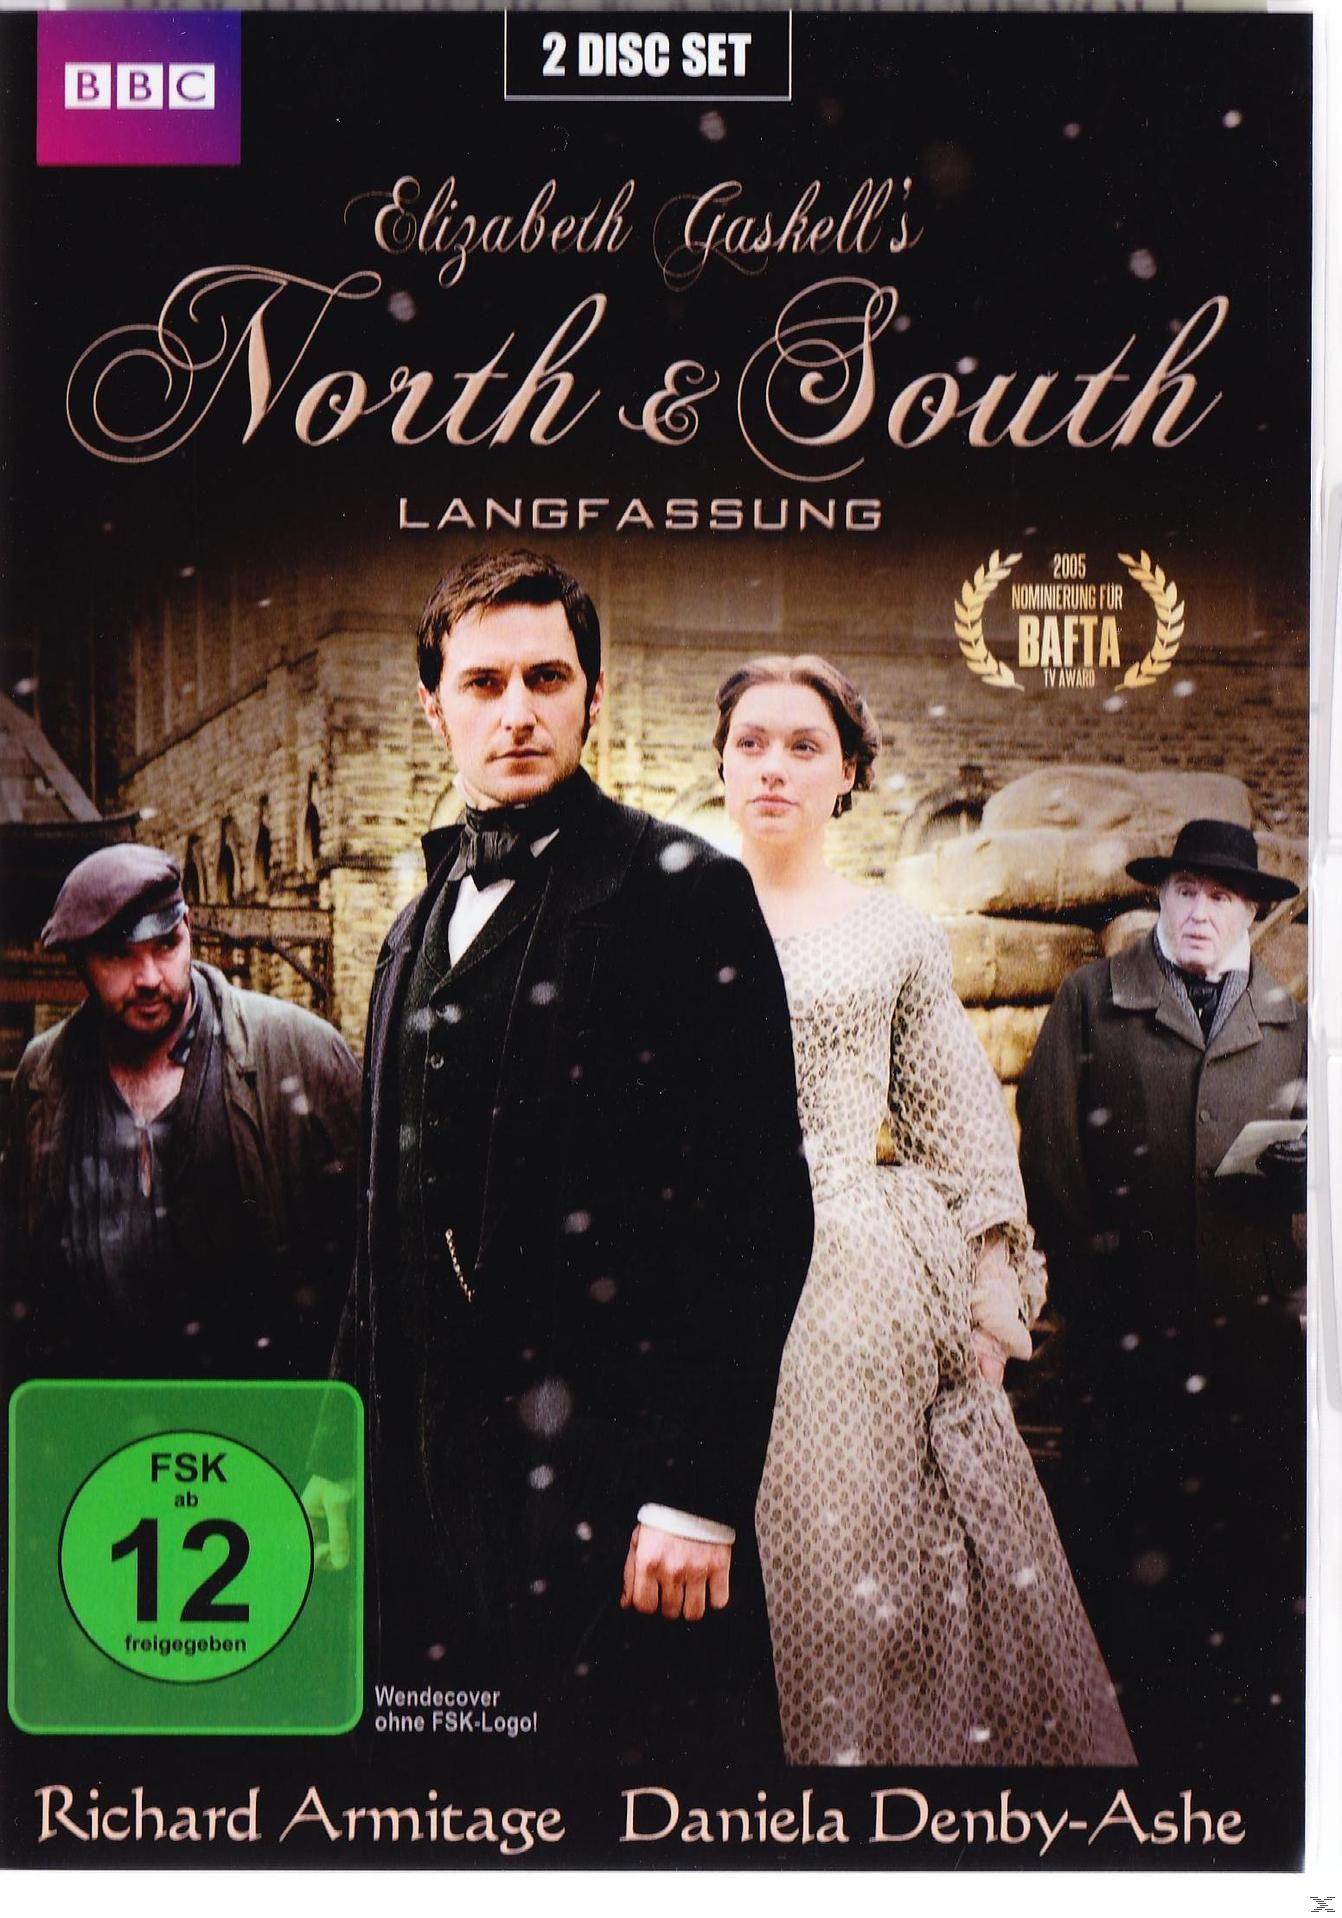 South DVD and North